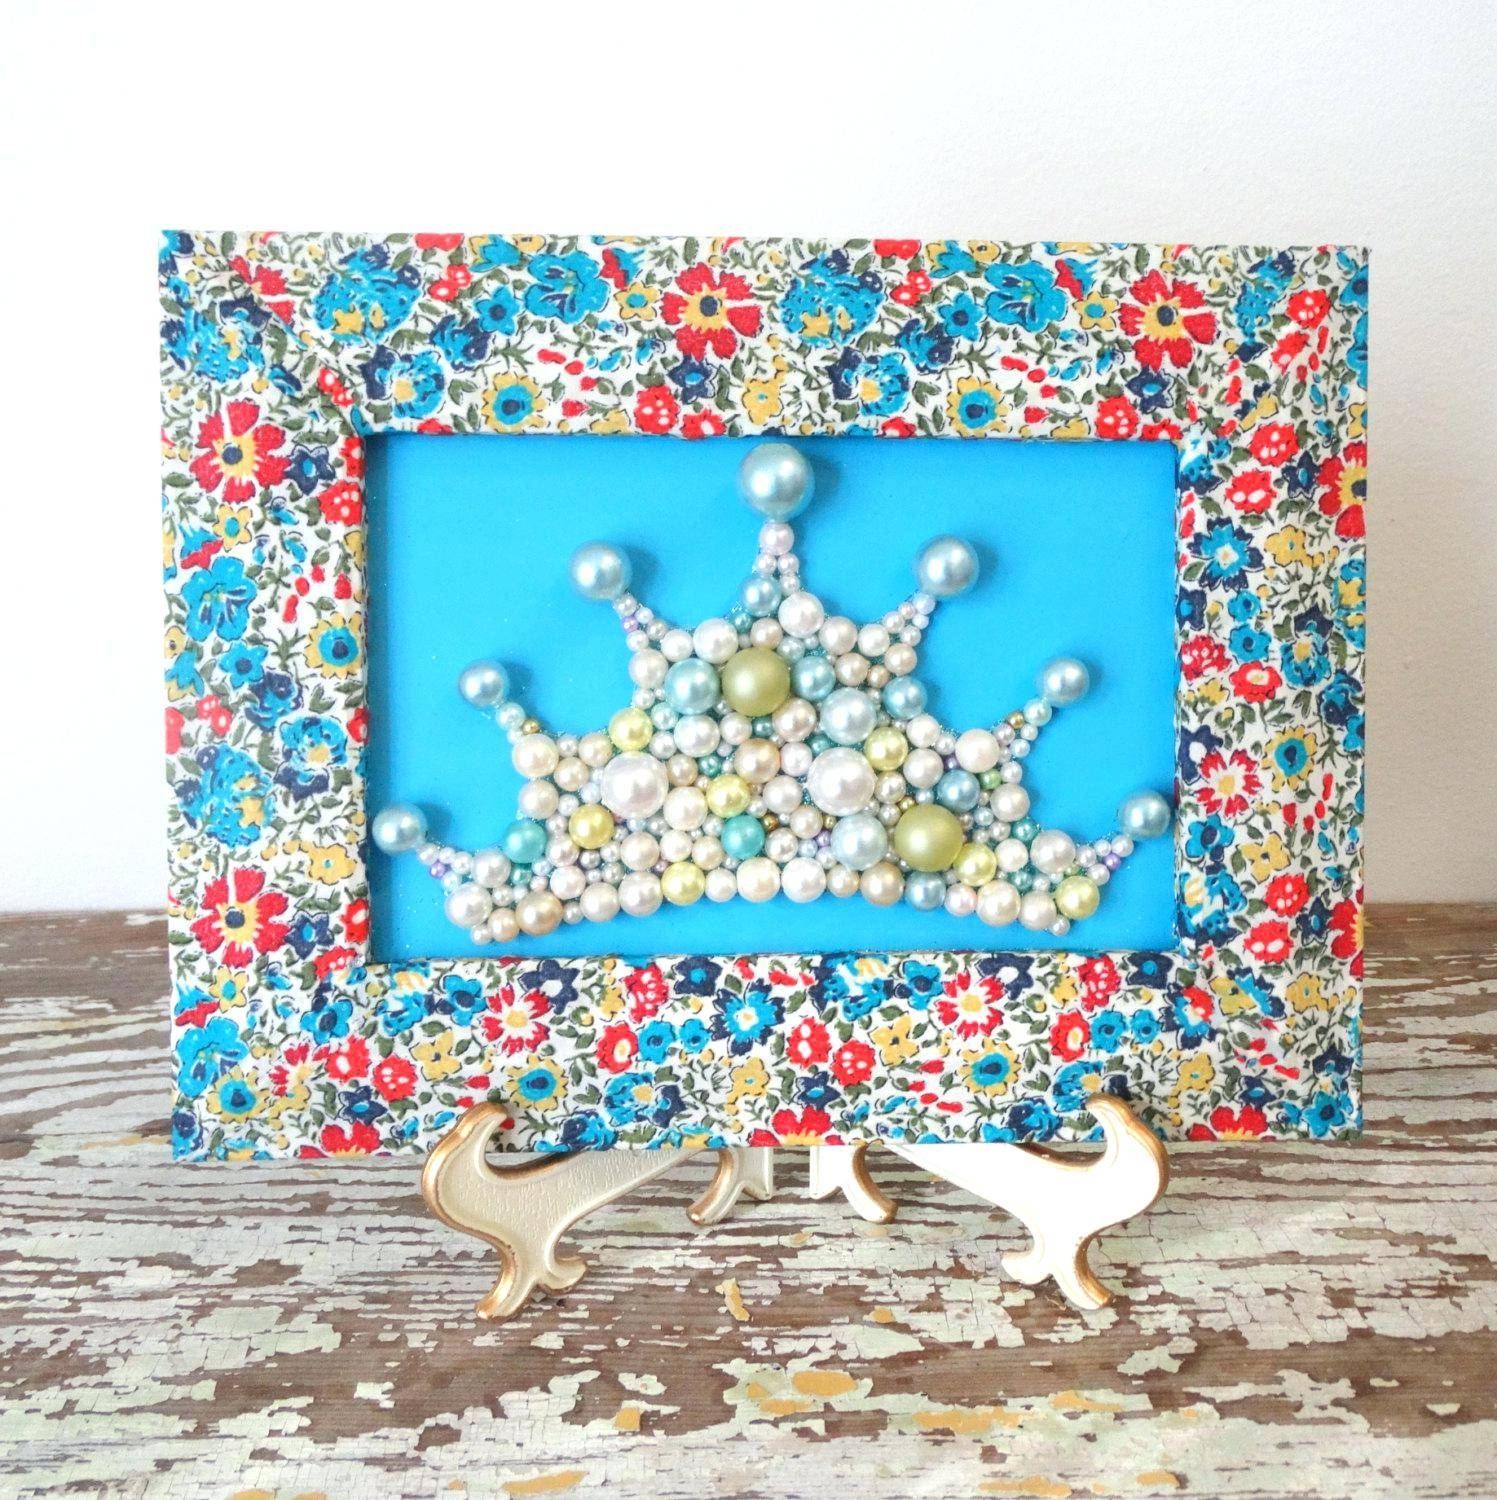 Wall Ideas: Crown Wall Art. Crown Wall Art. Princess Crown Wall Throughout Most Popular Decoupage Wall Art (Gallery 29 of 30)